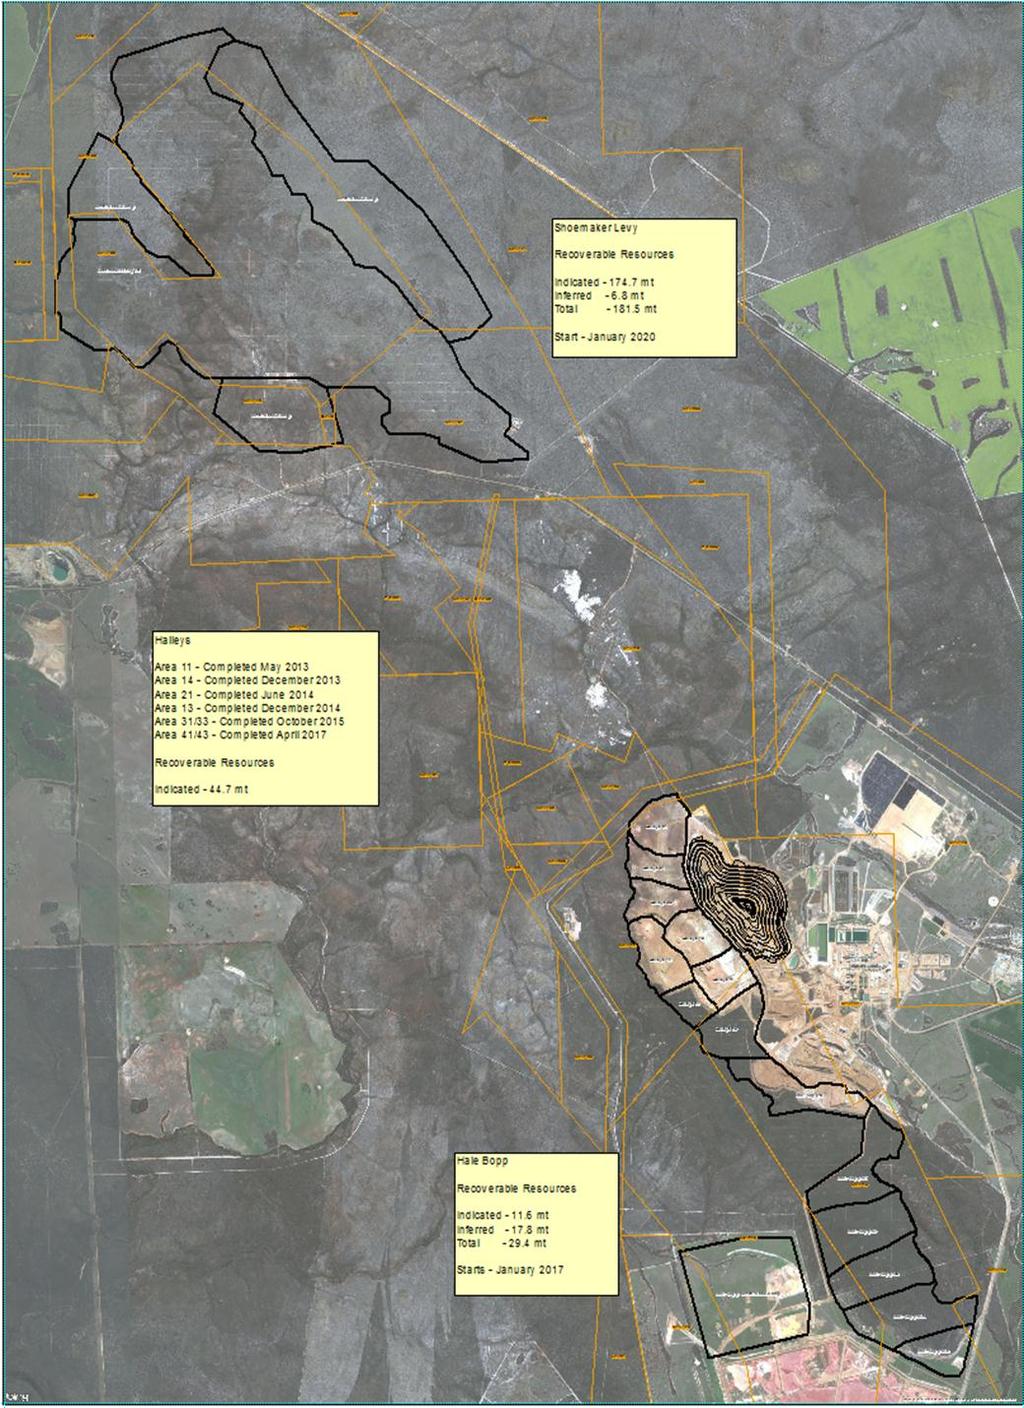 Ravensthorpe Recoverable Resources Mineral Recoverable Resources have been defined as the recoverable portion of the Mineral Resource contained within the life of mine pit profiles as developed